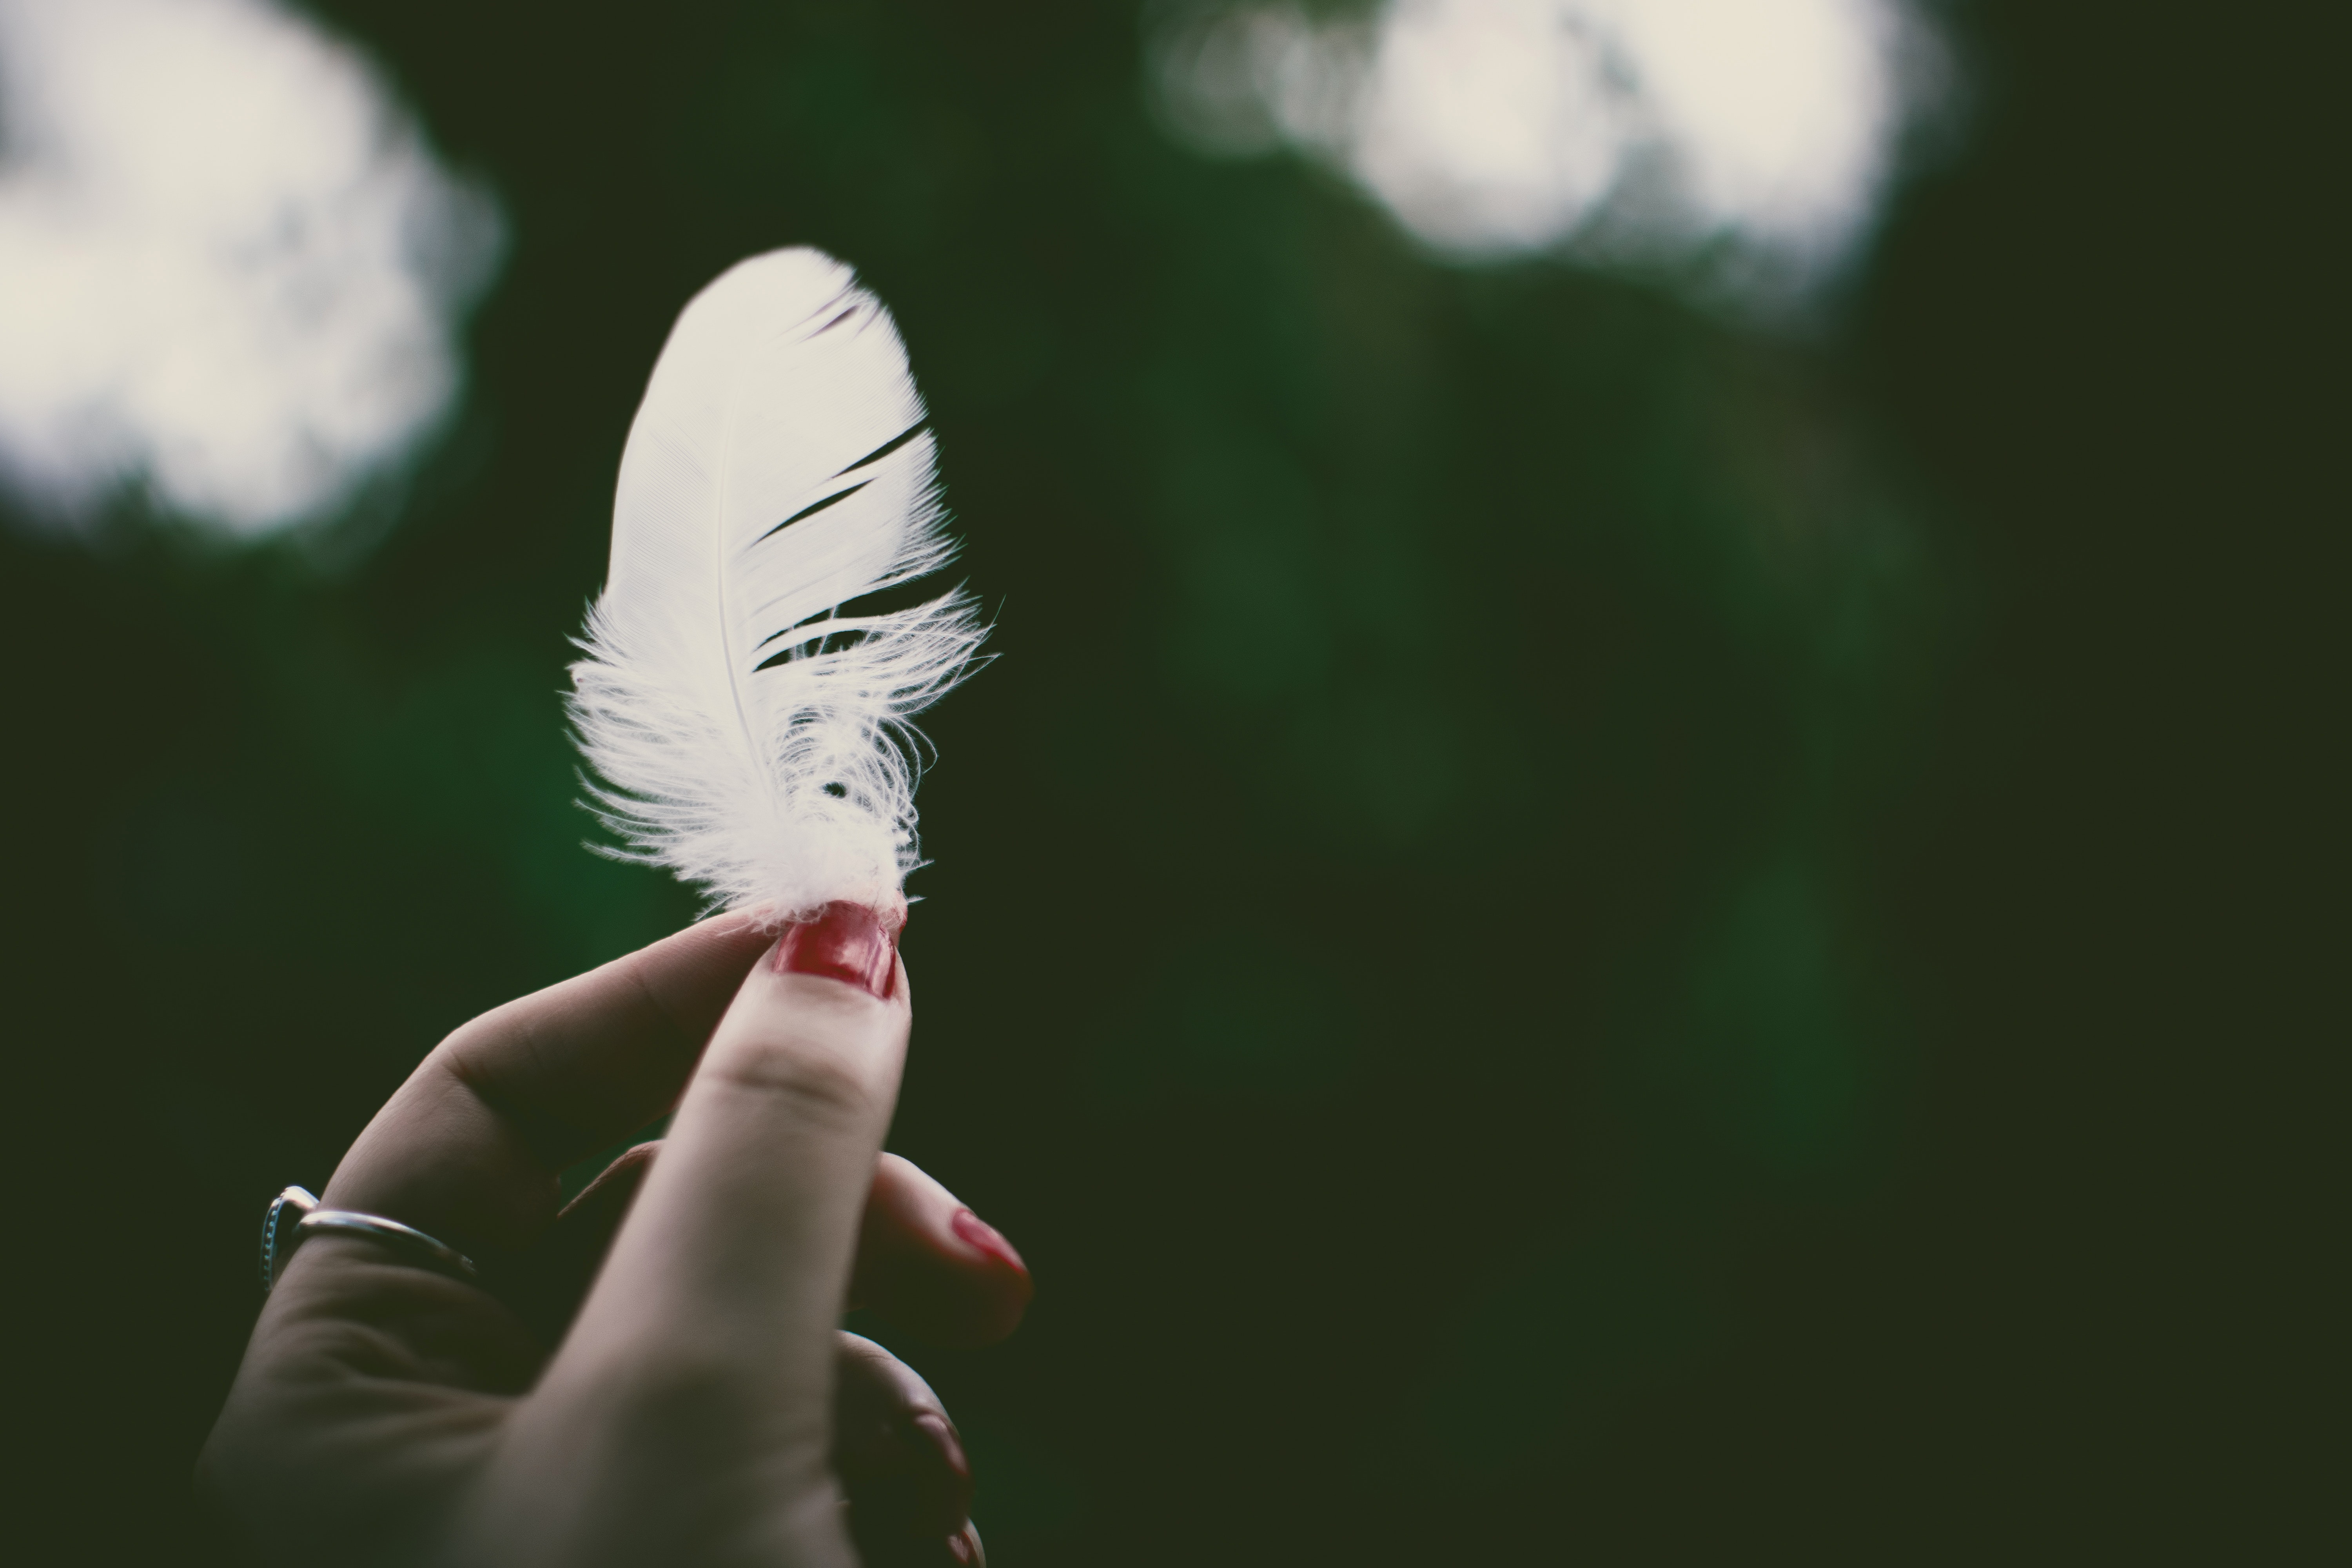 A person holding a white feather in a selective focus photography